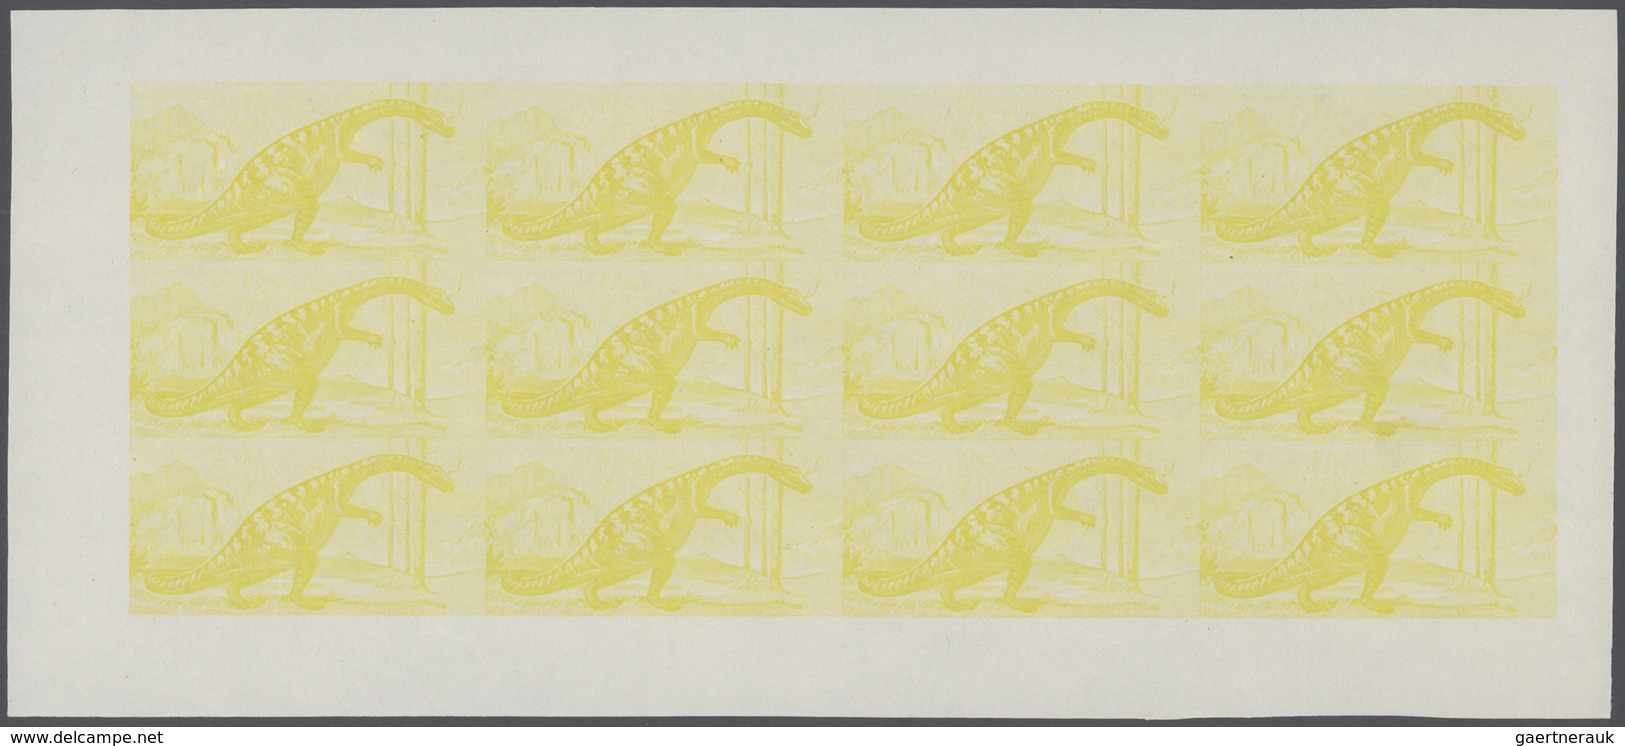 Thematik: Tiere-Dinosaurier / animals-dinosaur: 1968, Fujeira. Progressive proofs set of sheets for